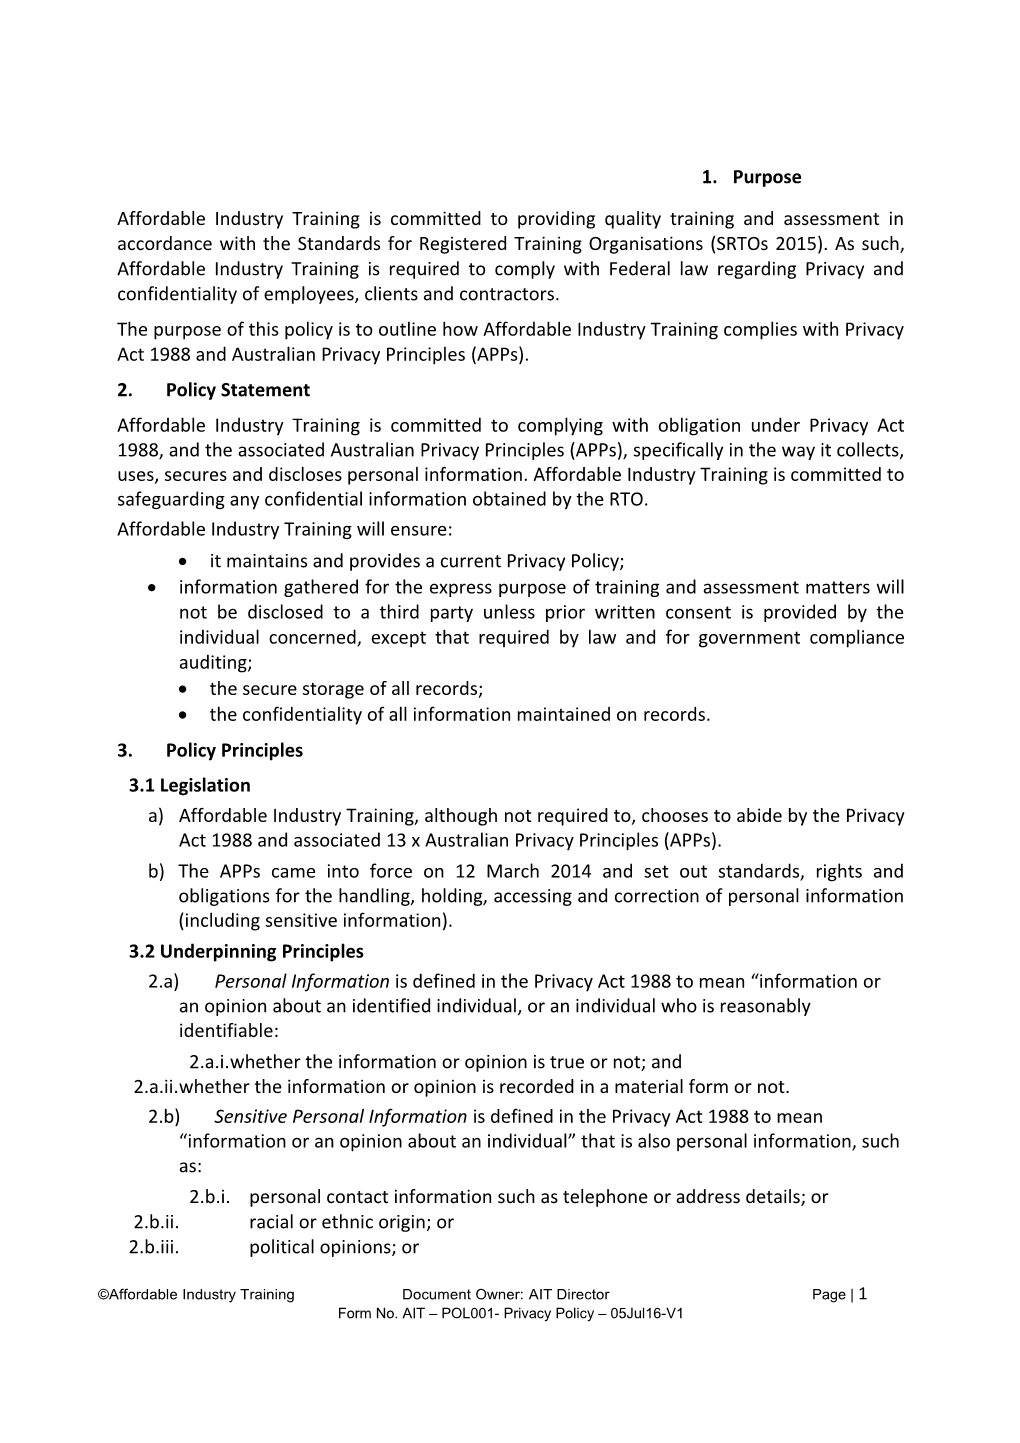 Affordable Industry Training Document Owner: AIT Director Page 3